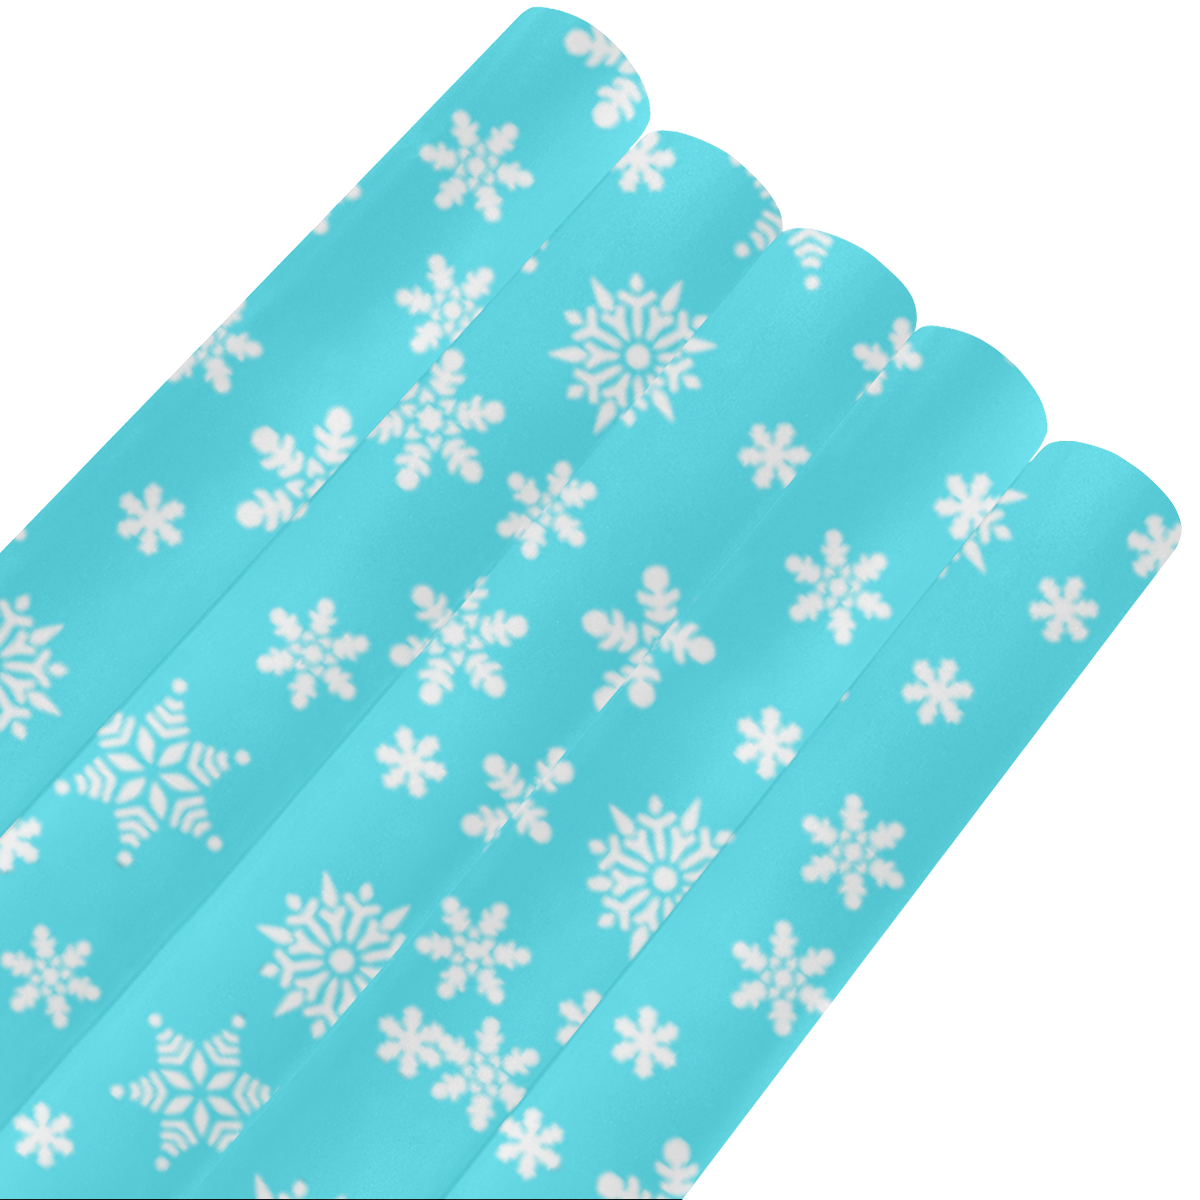 Christmas White Snowflakes on Turquoise Gift Wrapping Paper 58"x 23" (5 Rolls)